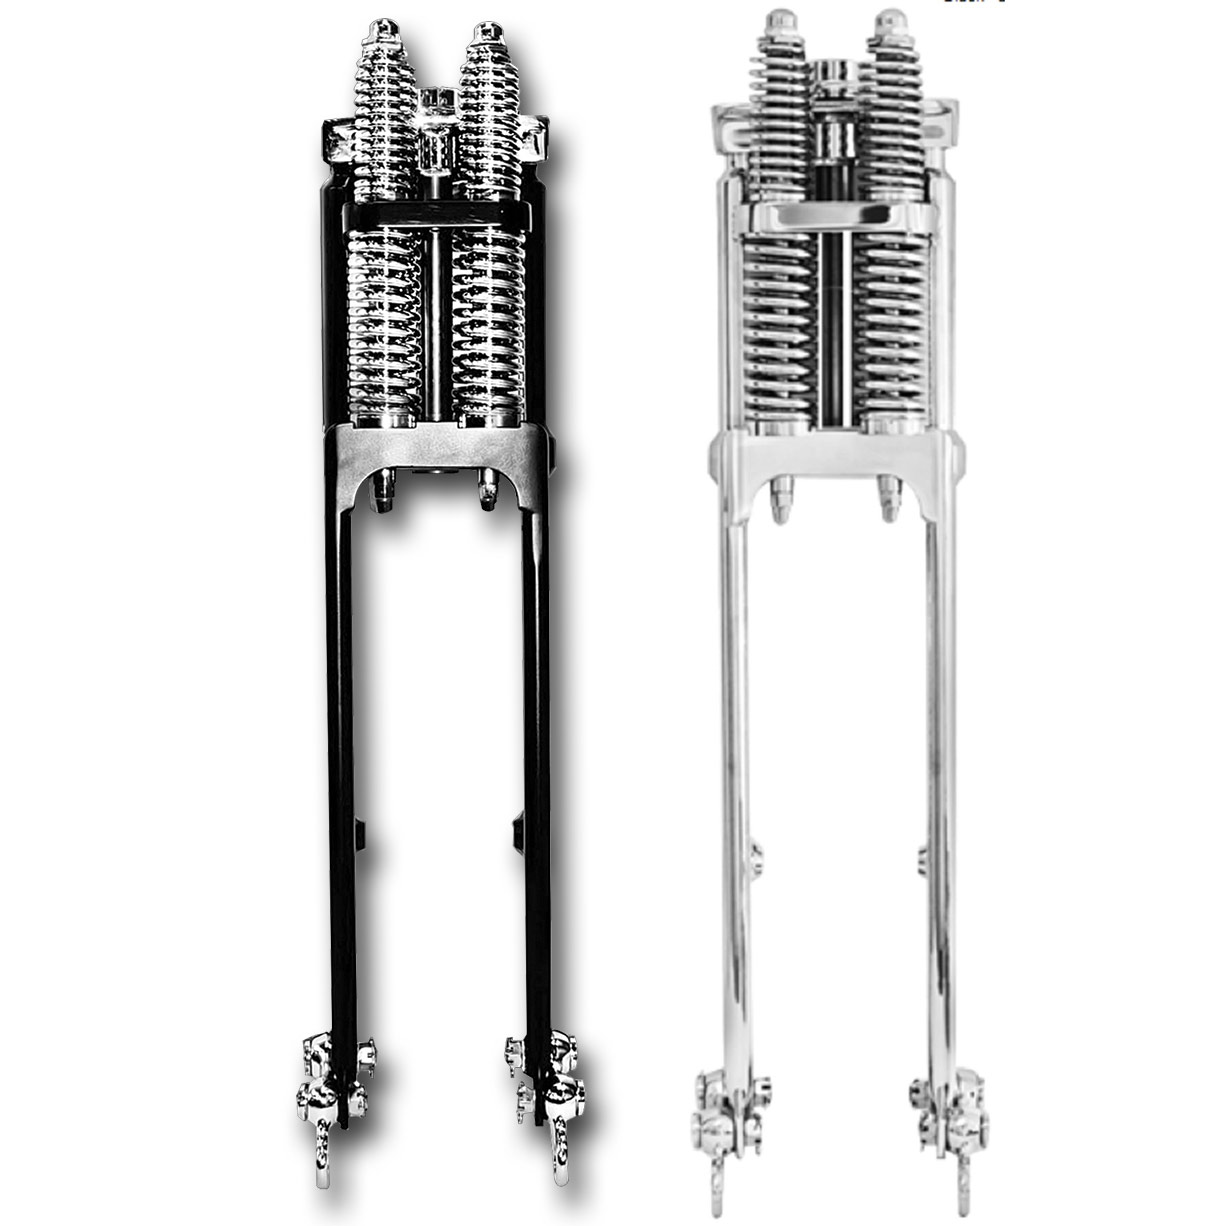 W&W Cycles - Classic Springer Forks ≥8” Longer than Stock for  Harley-Davidson